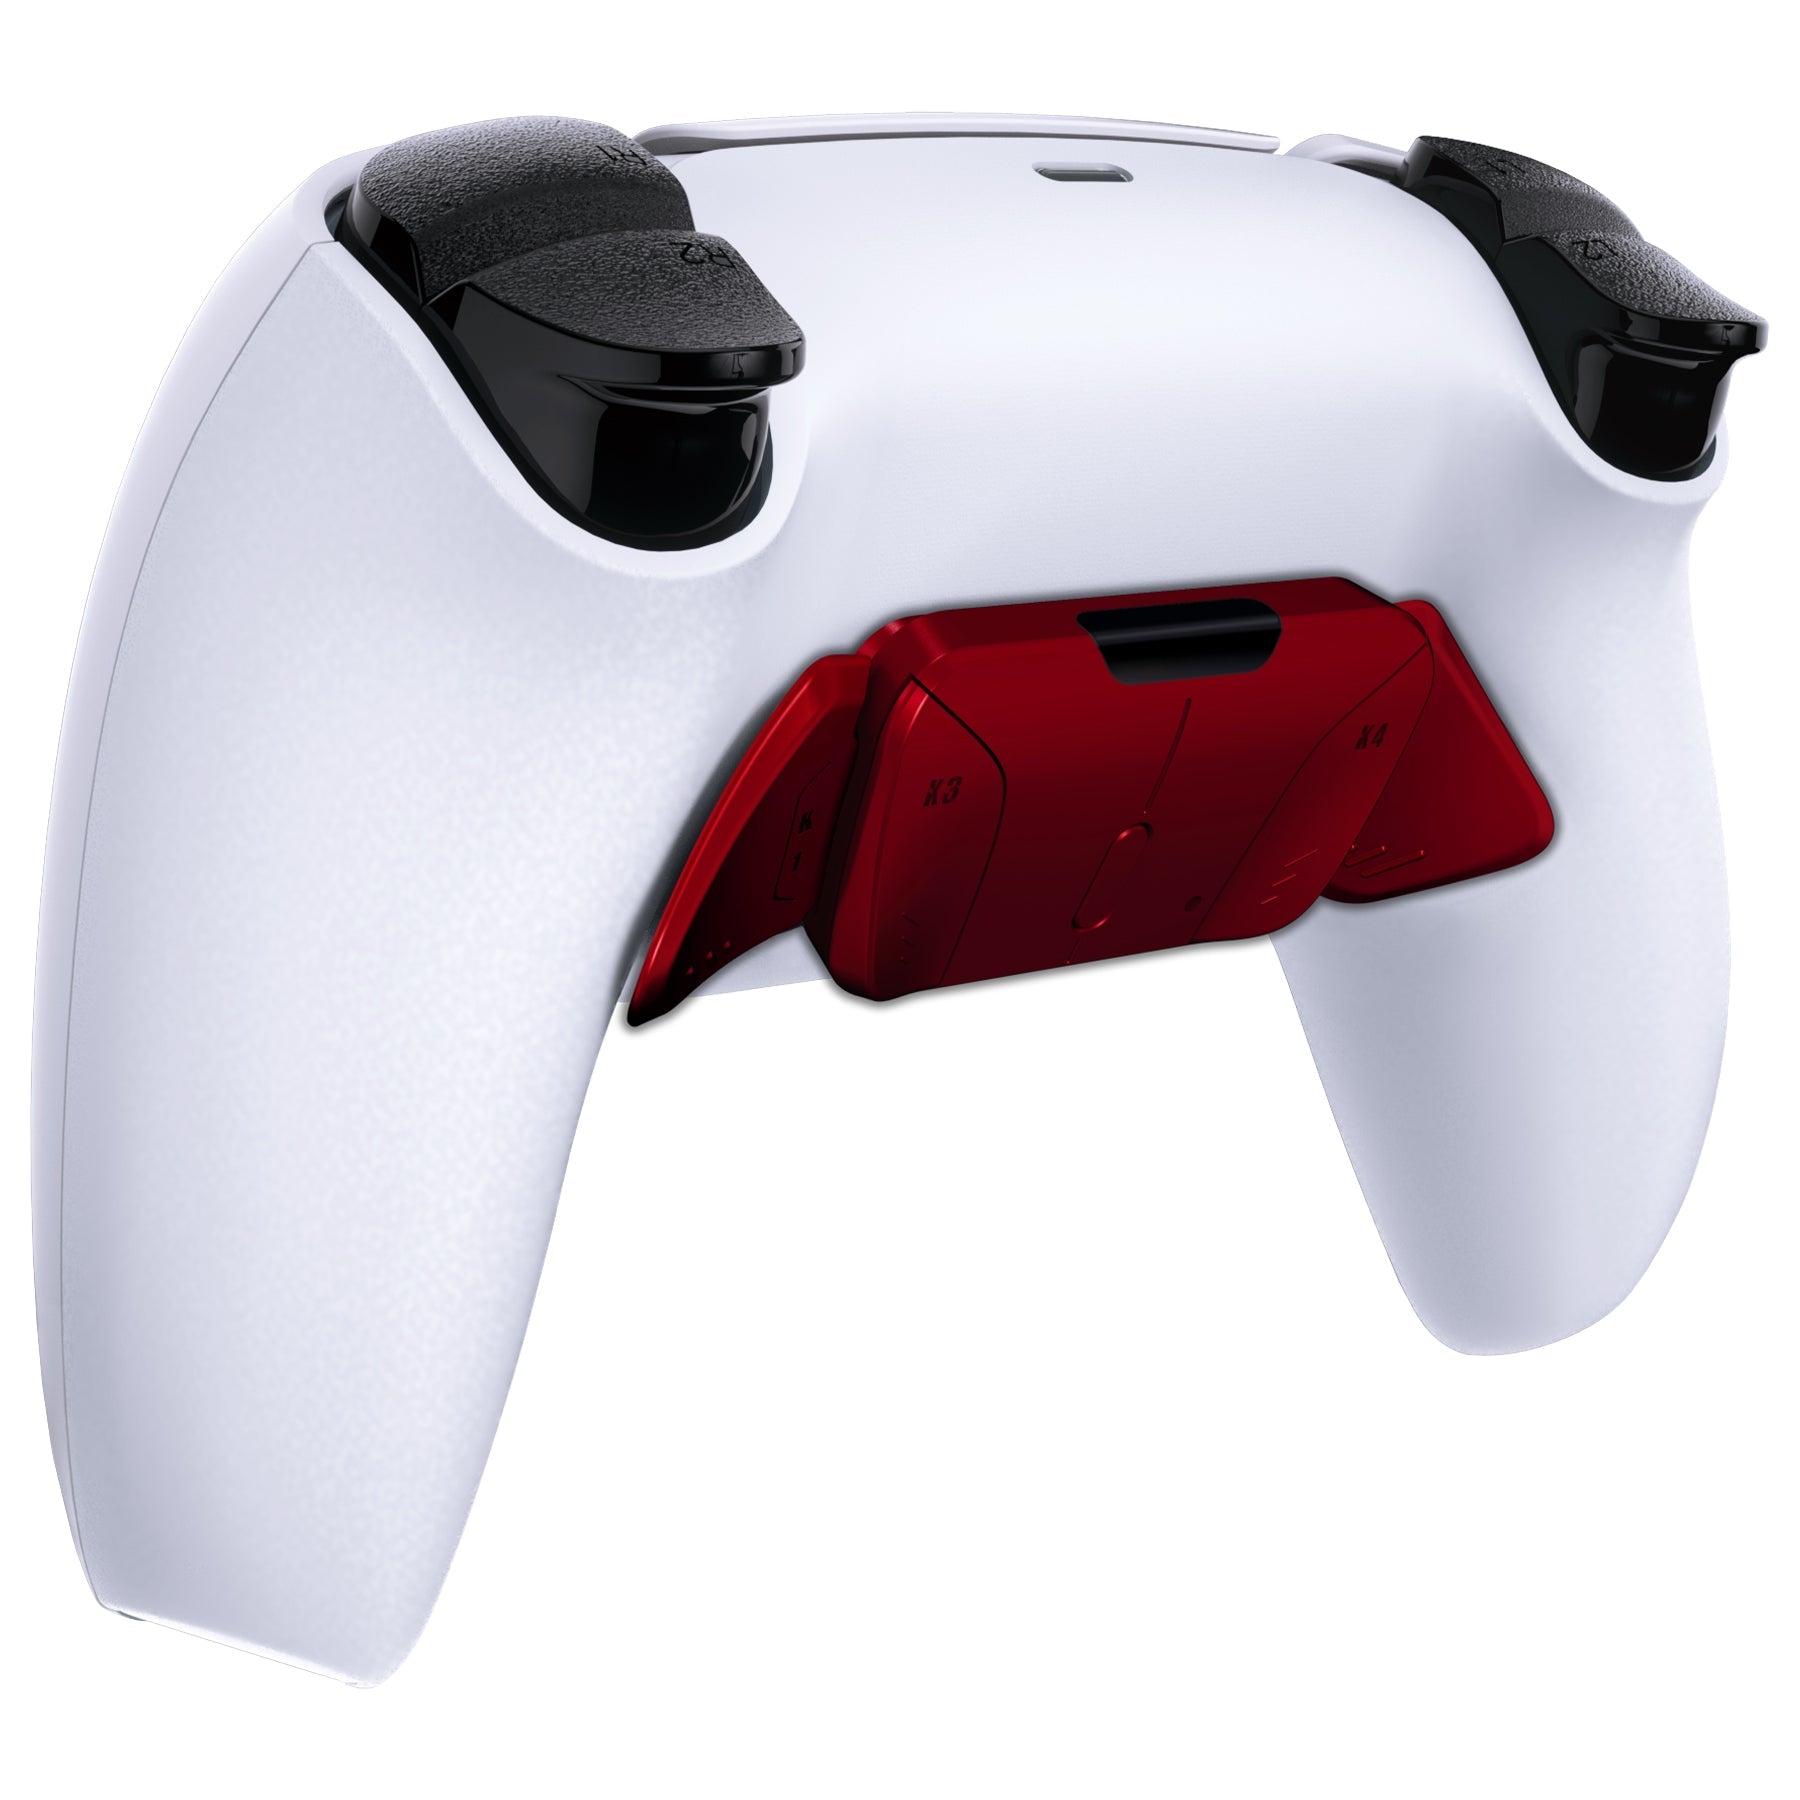 eXtremeRate Retail Scarlet Red Replacement Redesigned K1 K2 K3 K4 Back Buttons Housing Shell for ps5 Controller eXtremeRate RISE4 Remap Kit - Controller & RISE4 Remap Board NOT Included - VPFP3002